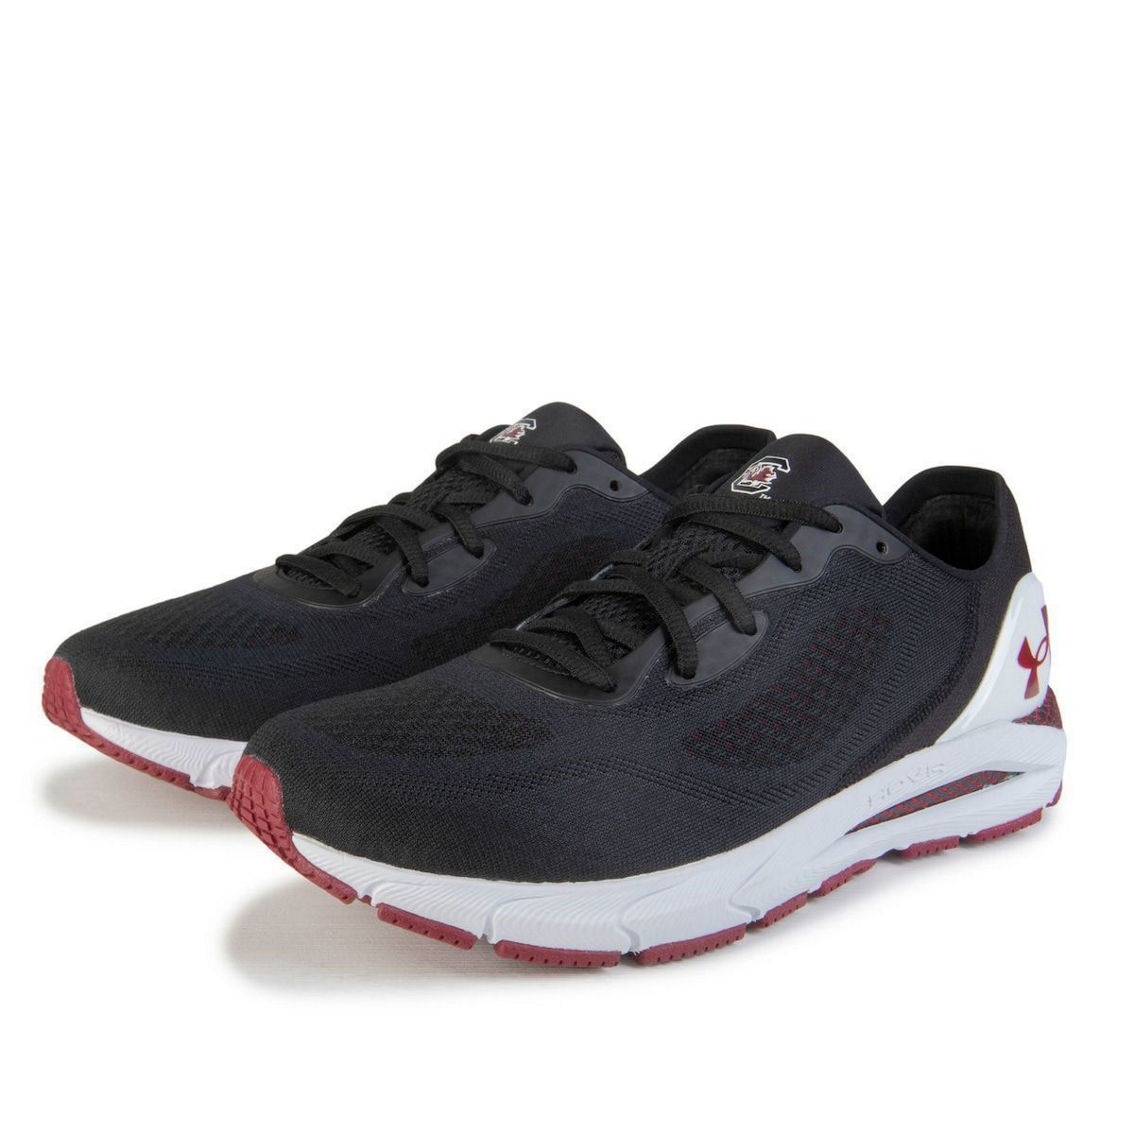 Under Armour Women's Black South Carolina Gamecocks HOVR Sonic 5 Running Shoes - Image 2 of 4